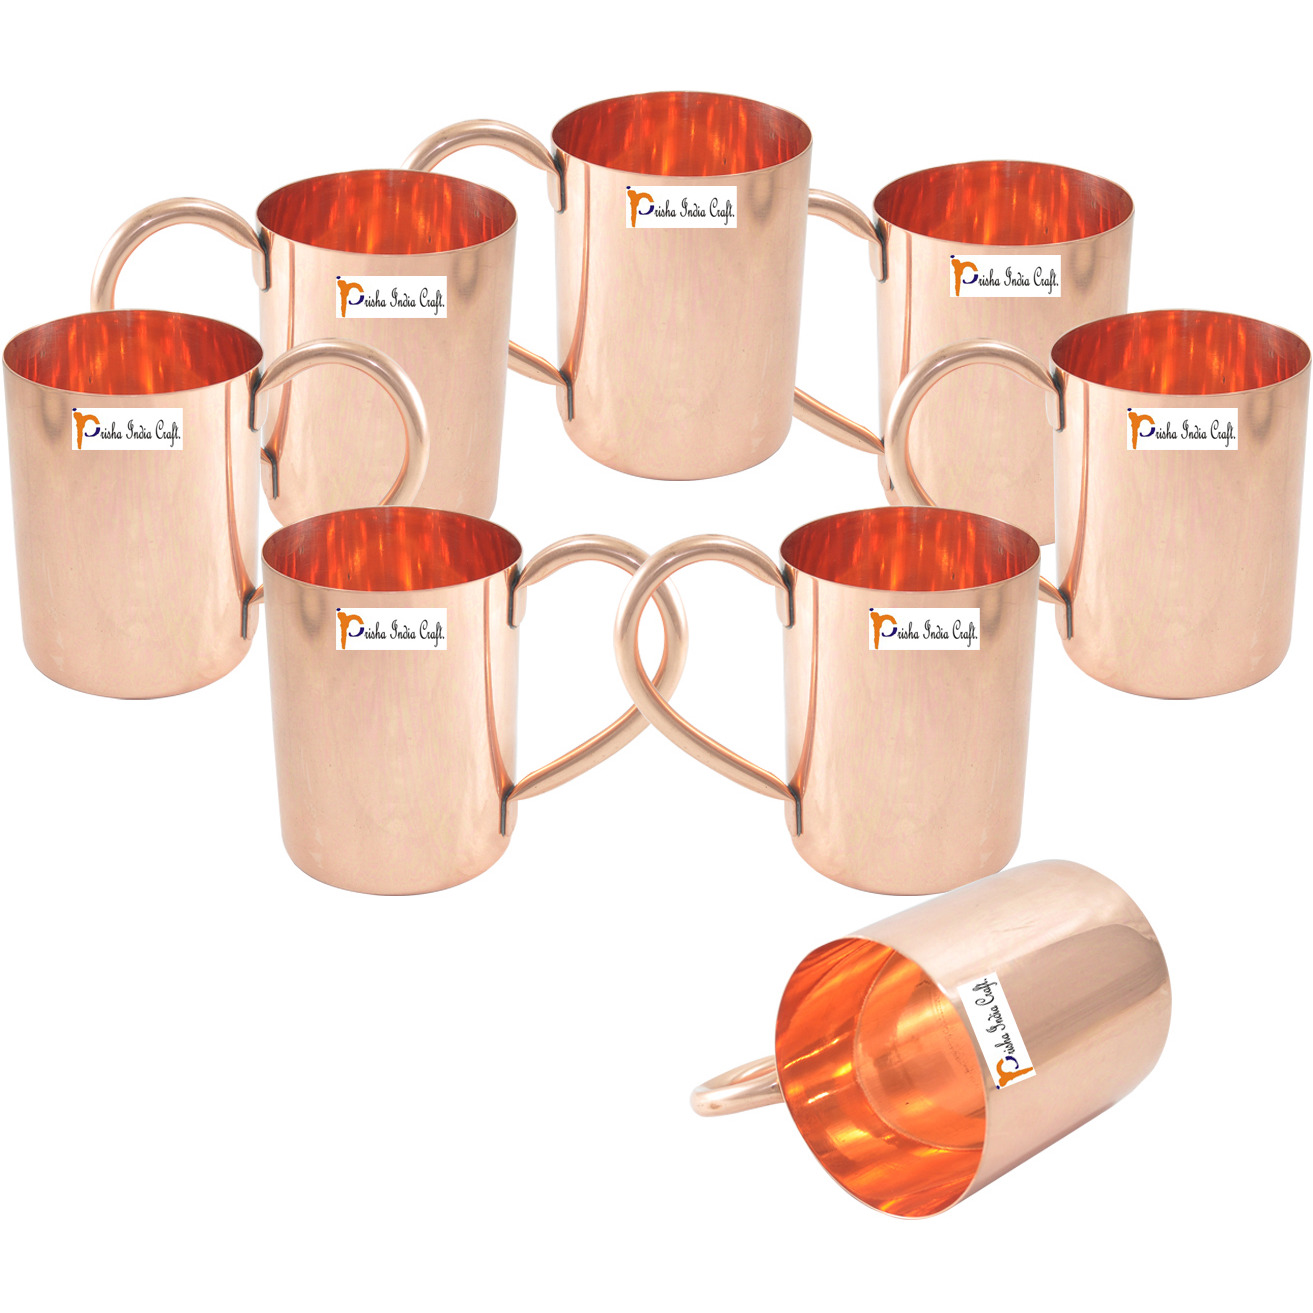 Set of 8 - Prisha India Craft B. Copper Mug for Moscow Mules 450 ML / 15 oz - 100% pure copper - Lacquered Finish - Solid Copper Best Quality Mug, Moscow Mule Cup, Copper Mugs, Cocktail Mugs Gift Idea